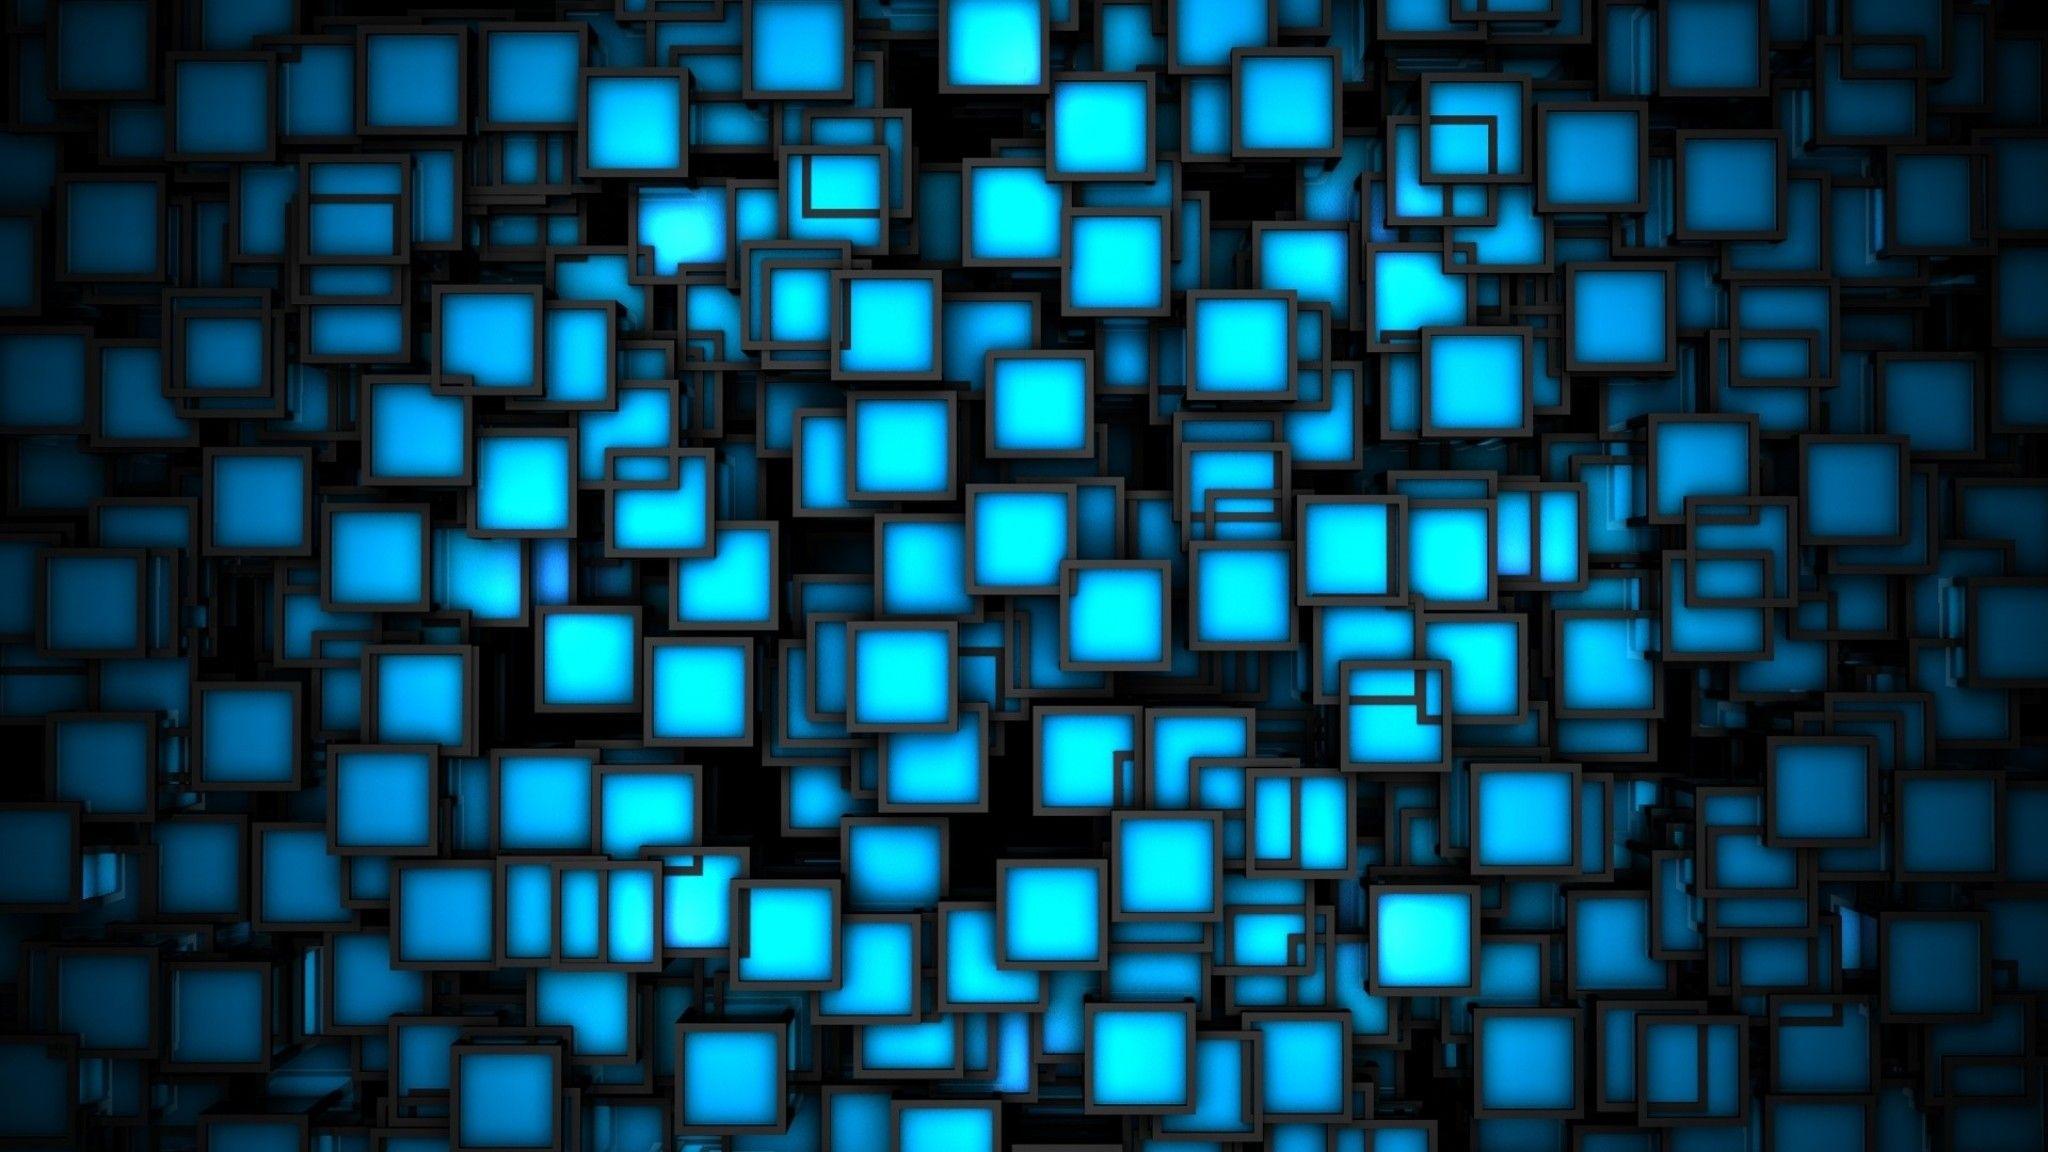 Blue and Neon Green Wallpaper